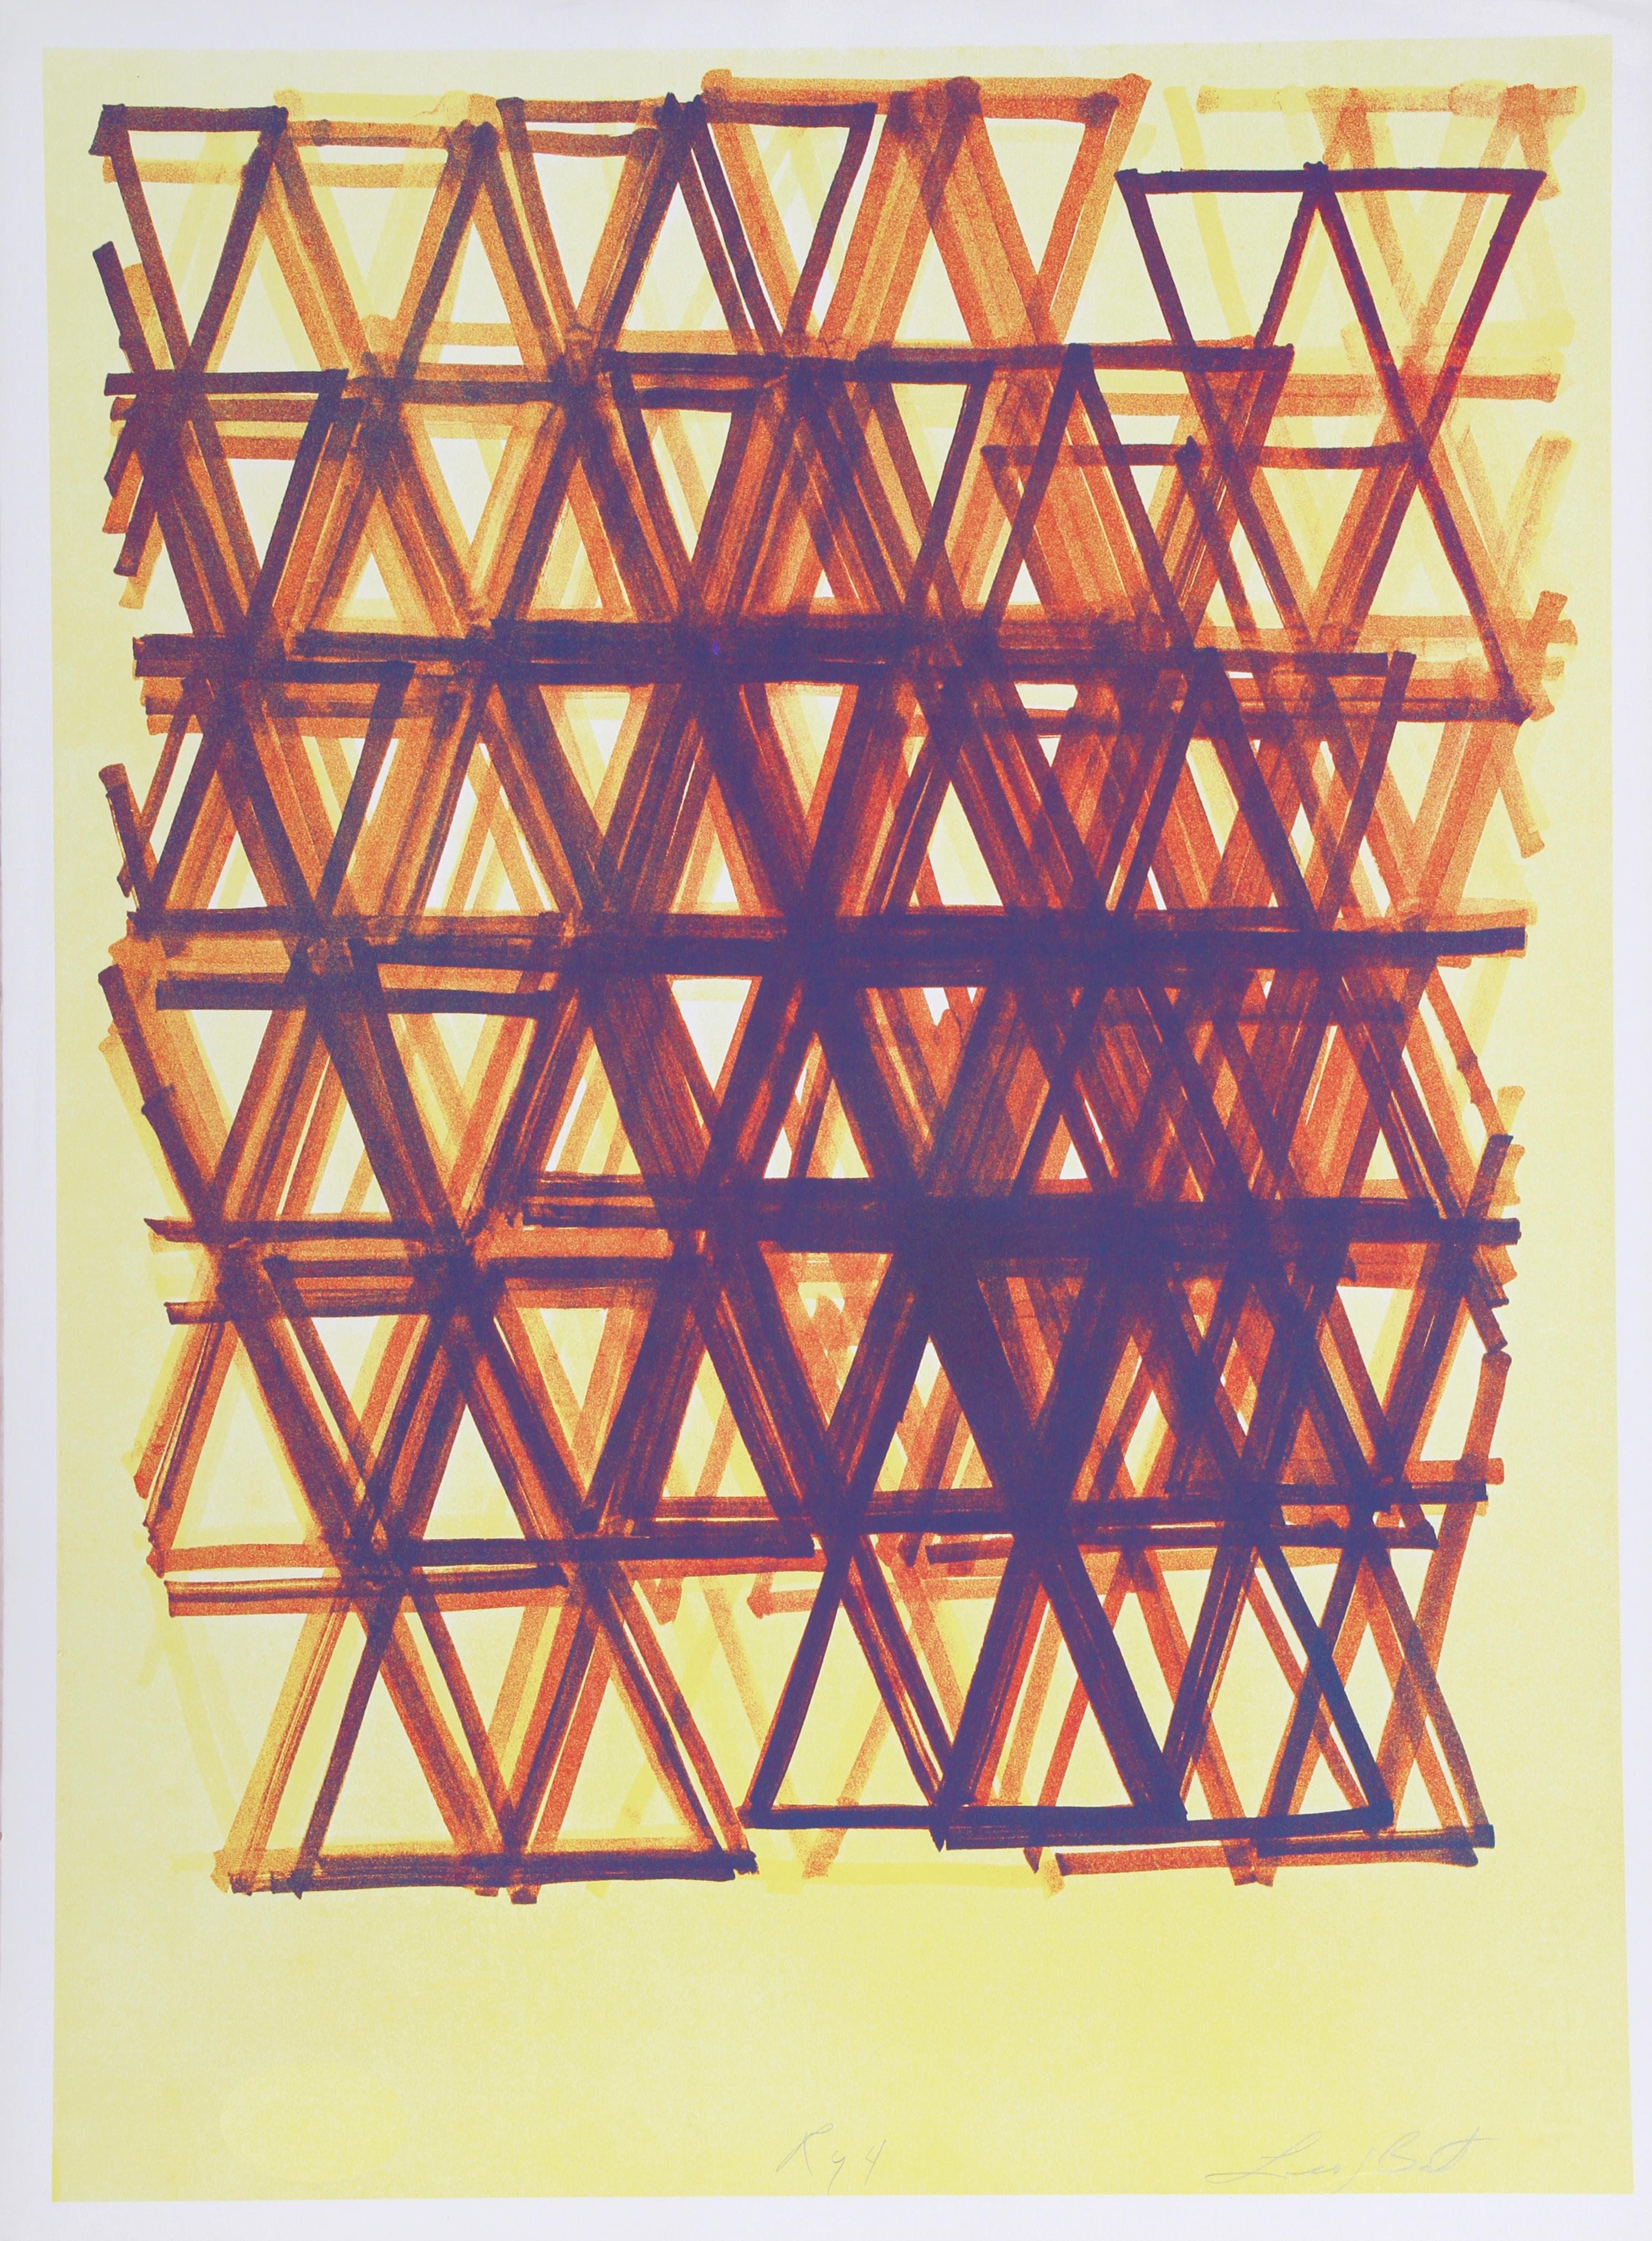 Artist:  Leo Bates (1944 - )
Title: Rhythm Series IV 
Year: 1978
Medium: Screenprint, signed and numbered in pencil 
Edition: 200 
Paper Size: 30 x 22.5 inches 